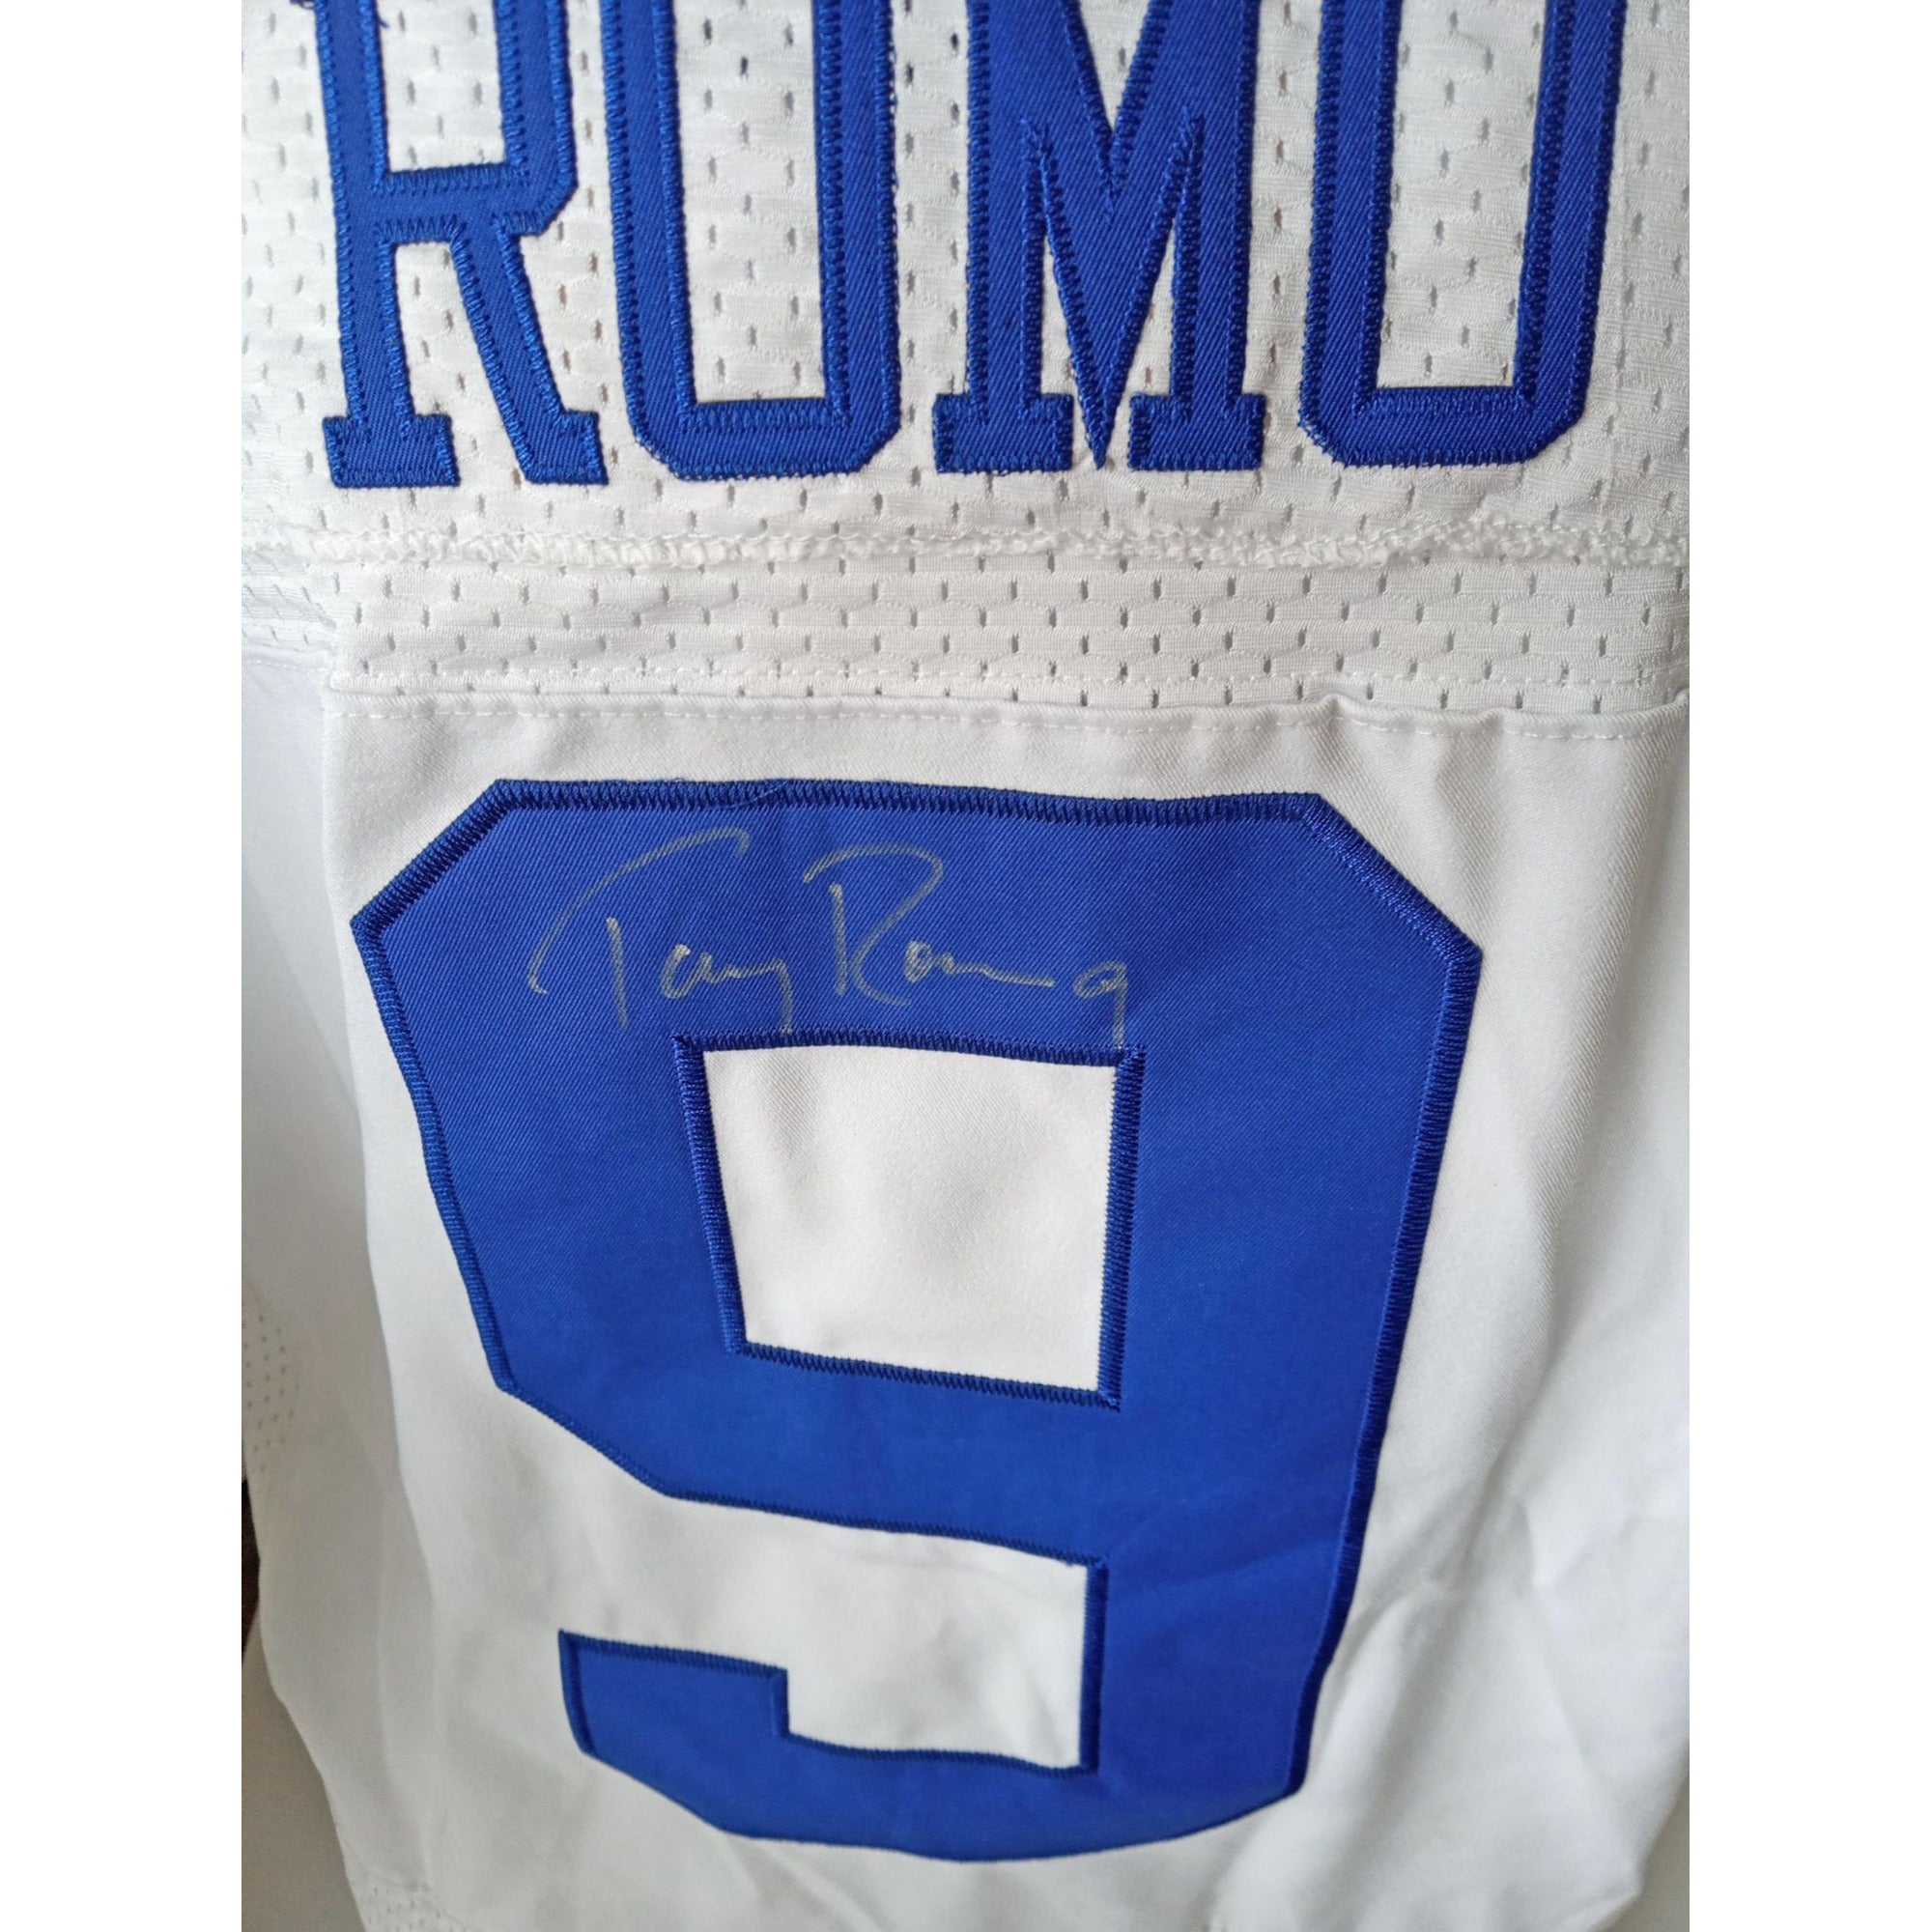 Tony Romo Dallas Cowboys signed jersey with proof